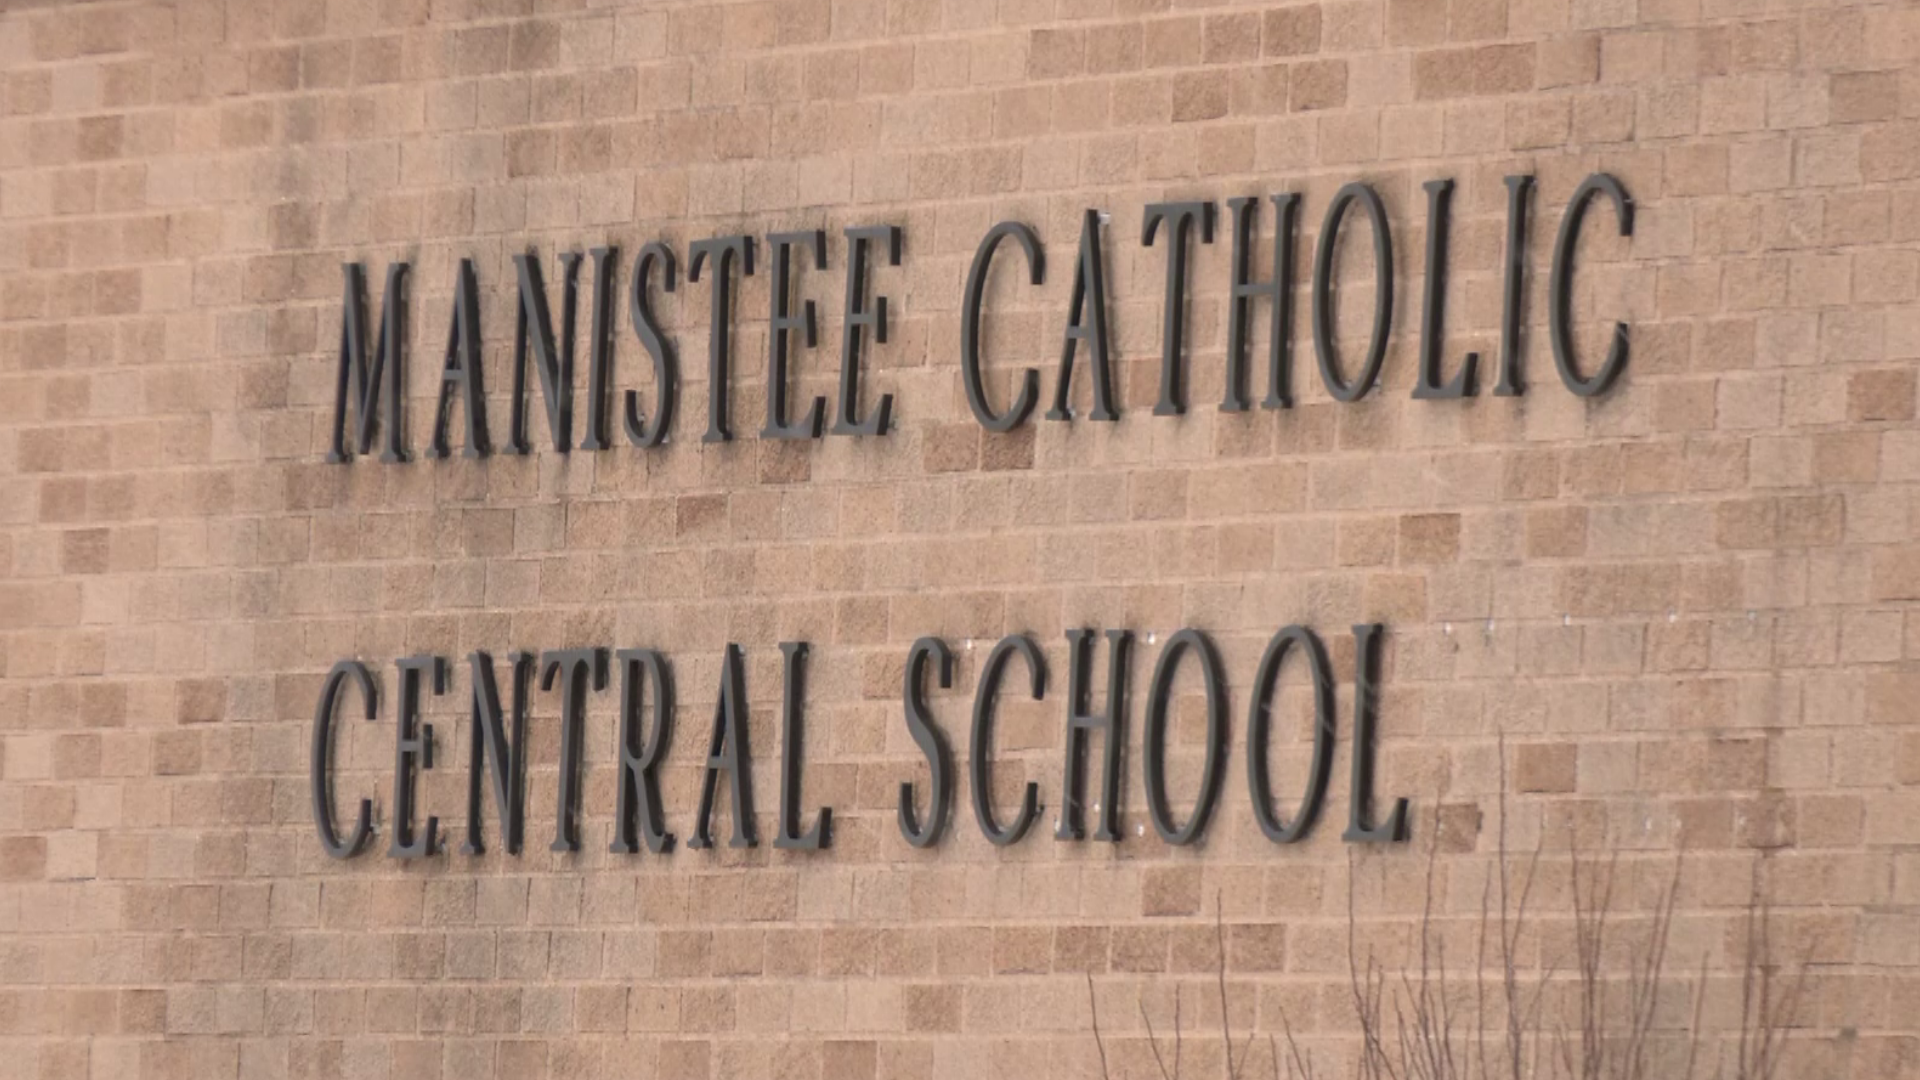 Manistee Catholic Central forced to close after failing to raise $2M